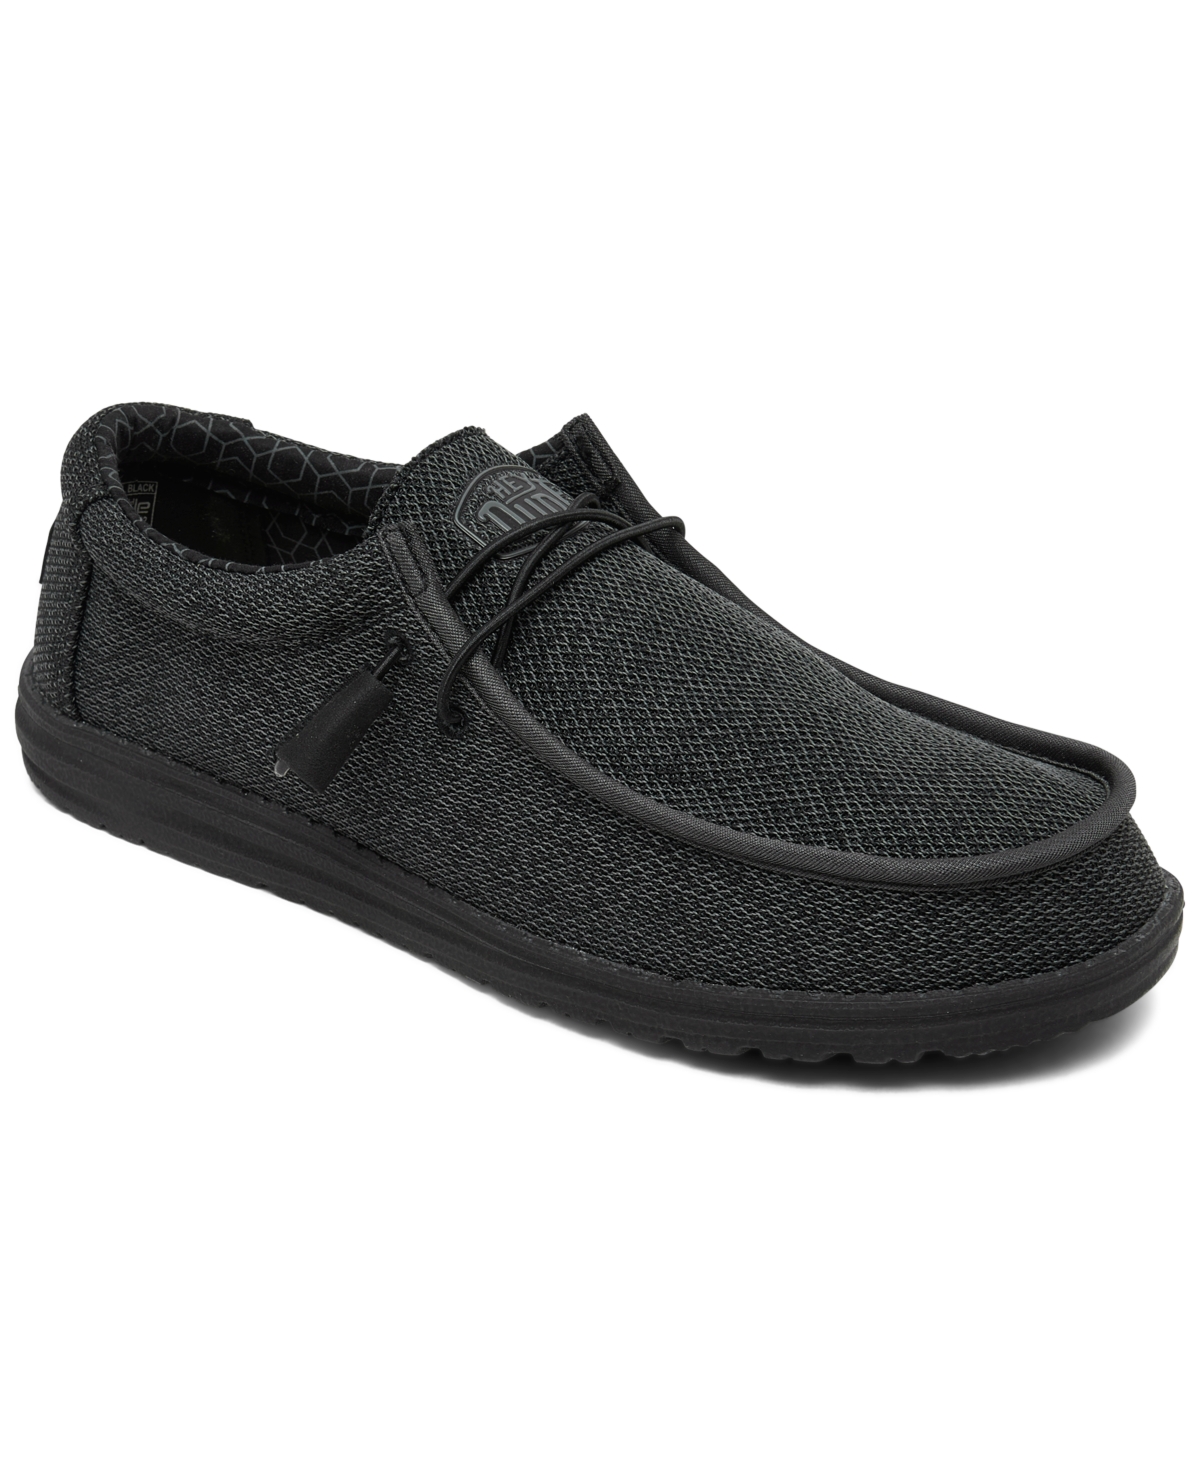 Men's Wally Sox Slip-On Casual Moccasin Sneakers from Finish Line - Black